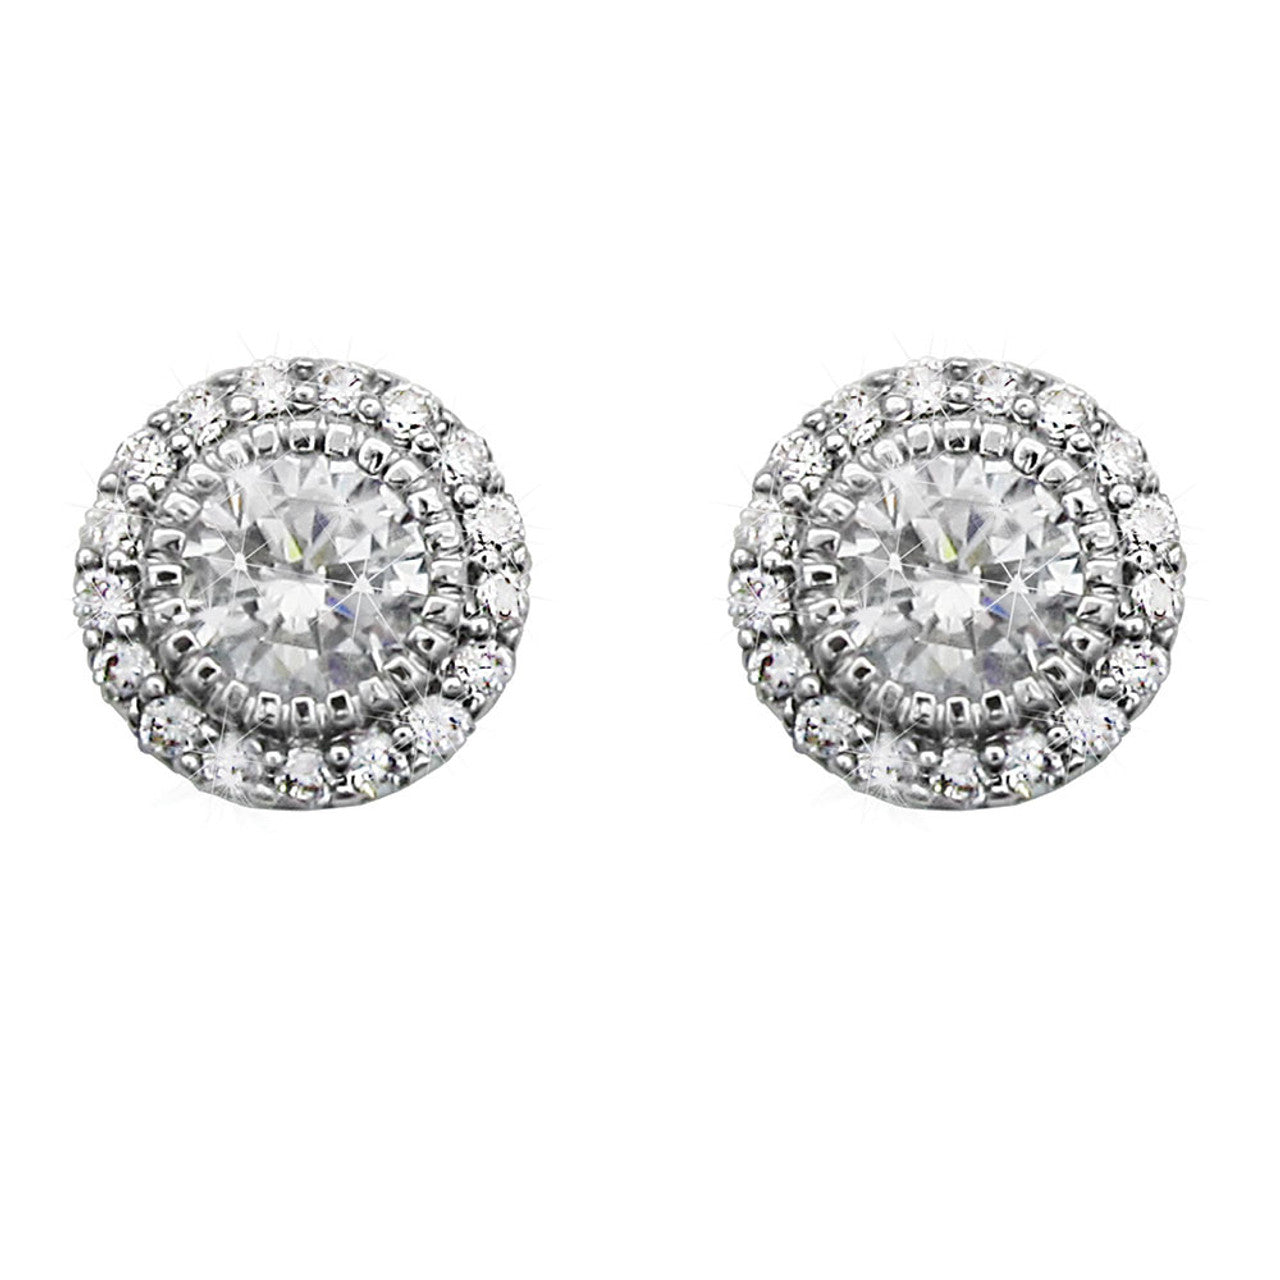 Tipperary Crystal Silver Stud Cz With Pave Surround Earrings  Perfect for day or evening wear, these elegant crystal post earrings will add sparkle with every turn of the head. Fashioned in timeless silver, each earring features a round cz stone, cut to sparkle and shimmer, wrapped in an embrace of tiny clear crystal accents. A radiant marriage of crystals and cool silver, brilliantly buffed these post earrings secure comfortably with push backs.